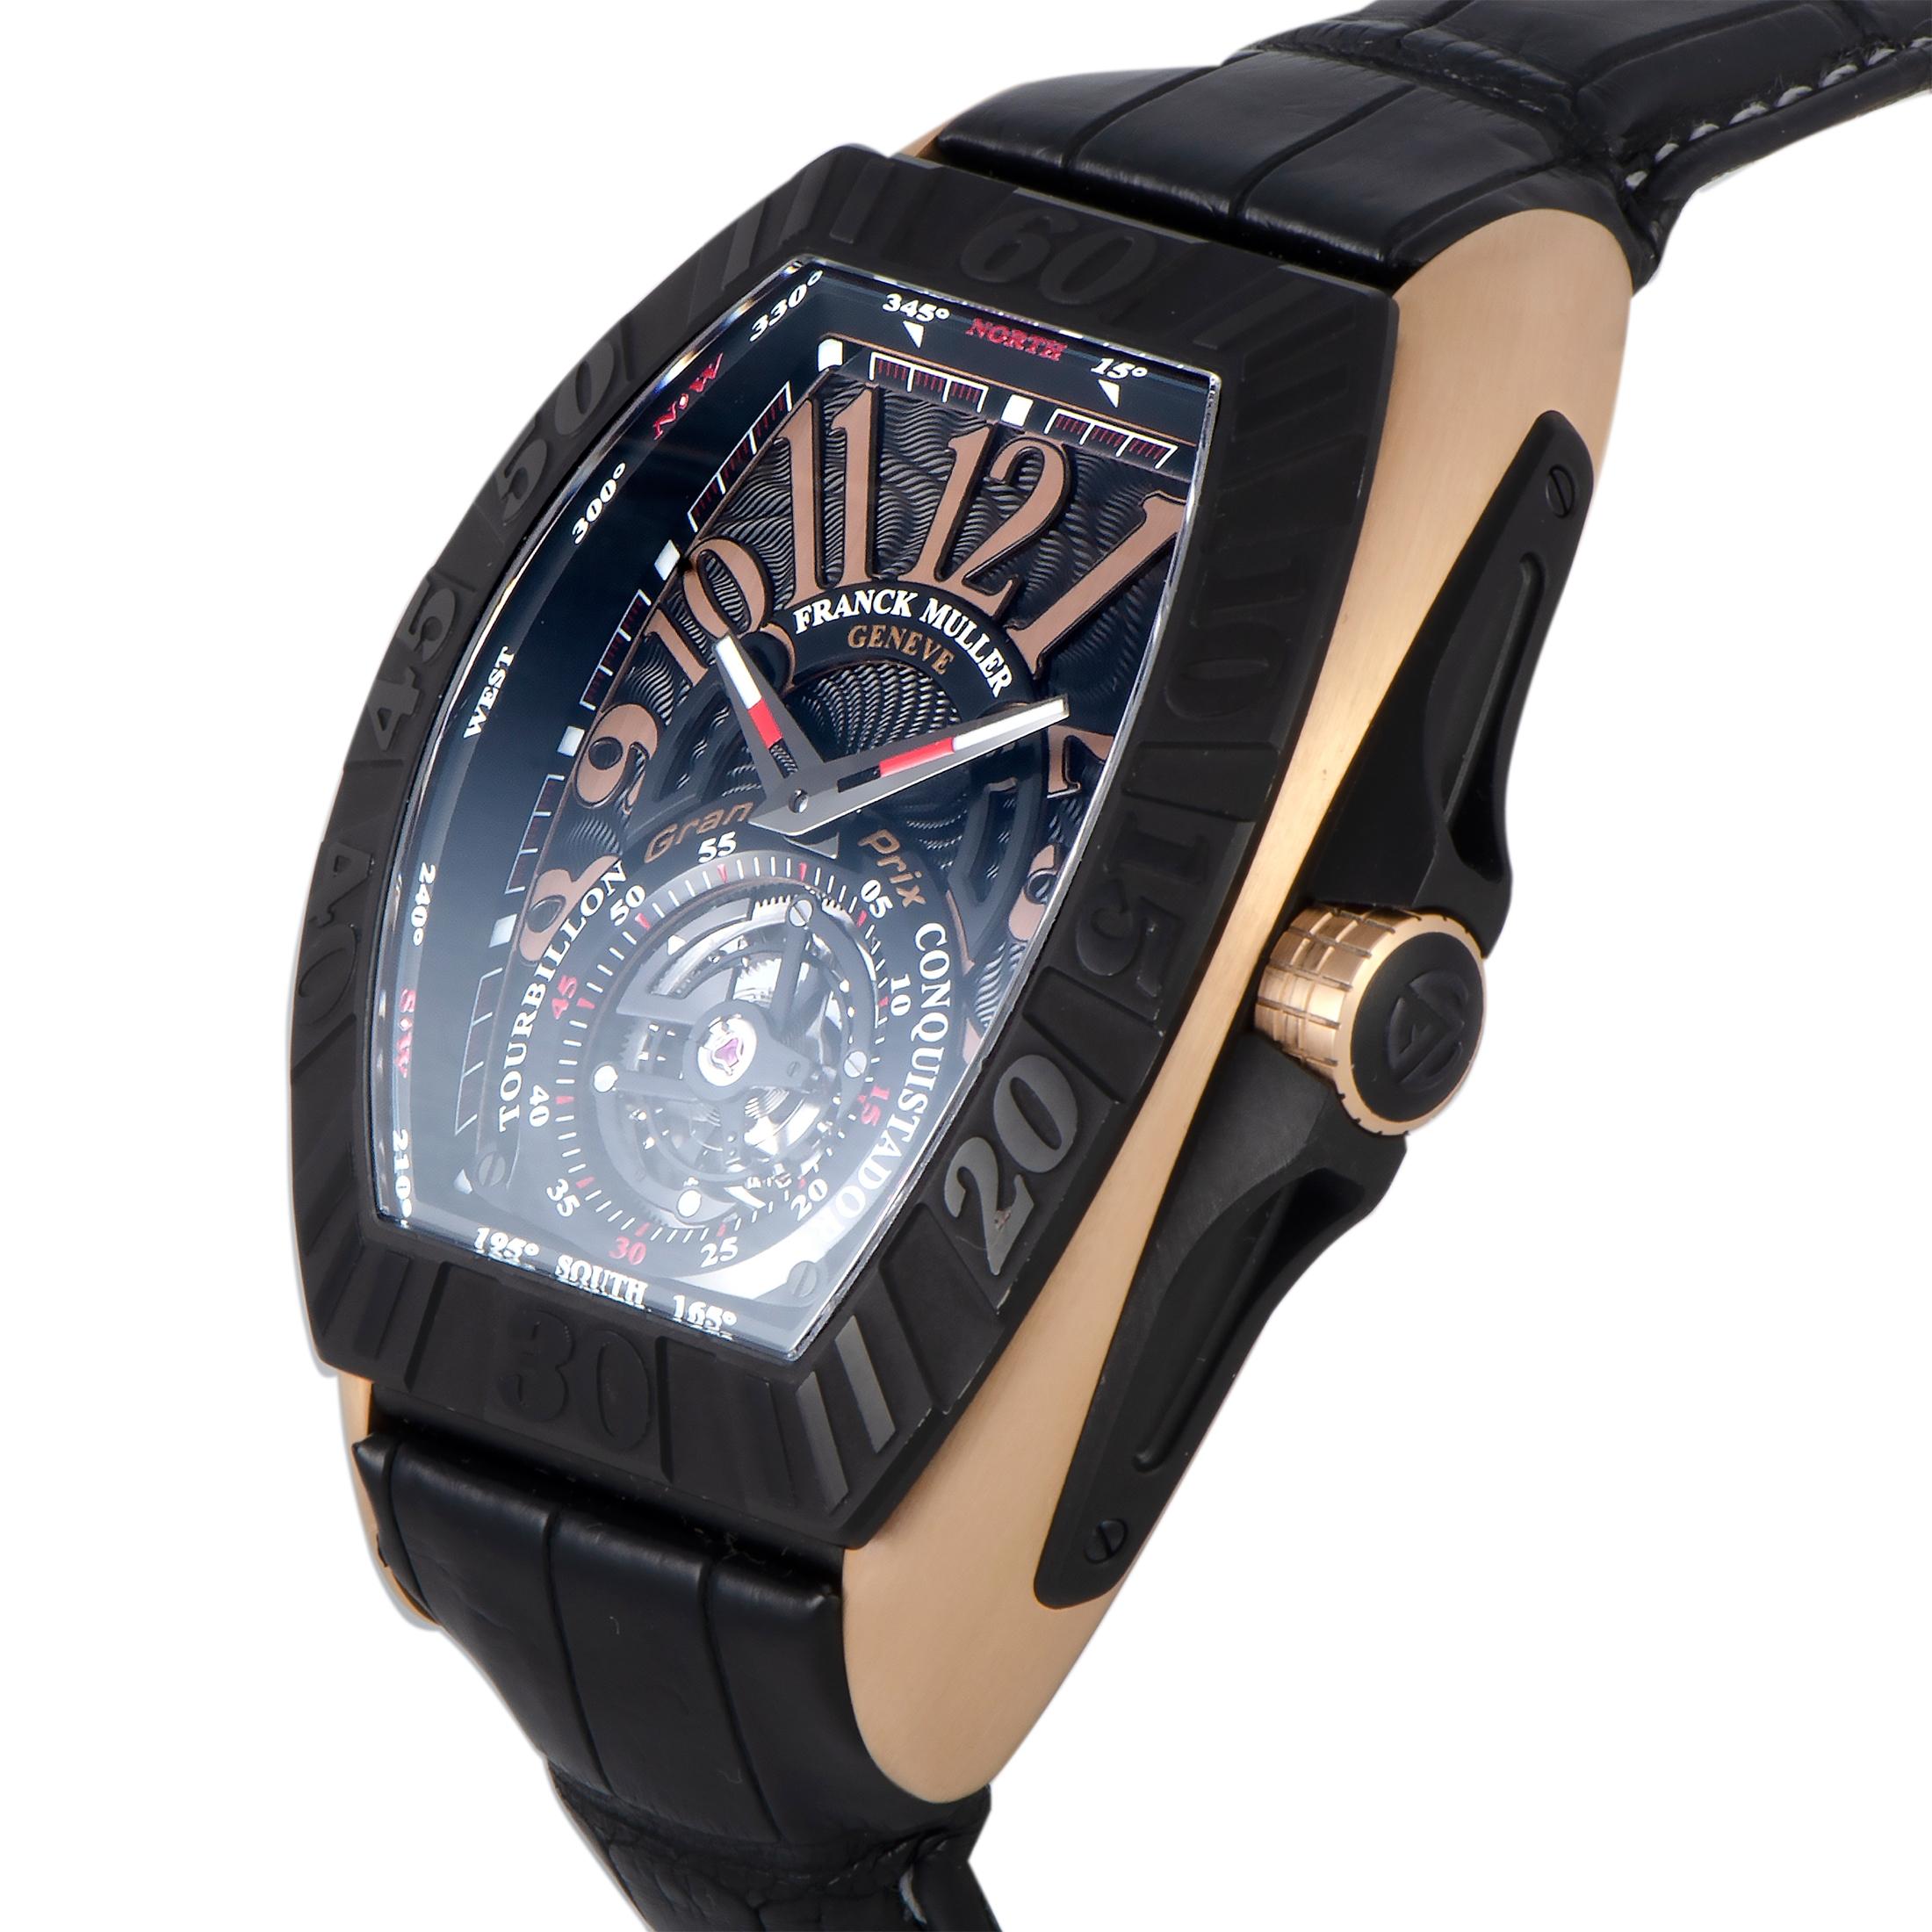 The Franck Muller Conquistador Grand Prix Tourbillon, reference number FM 9900 T GPG TT 5N, is presented with a case made of 18K rose gold and titanium that boasts see-through back. The watch is offered with a black dial with Arabic numerals and